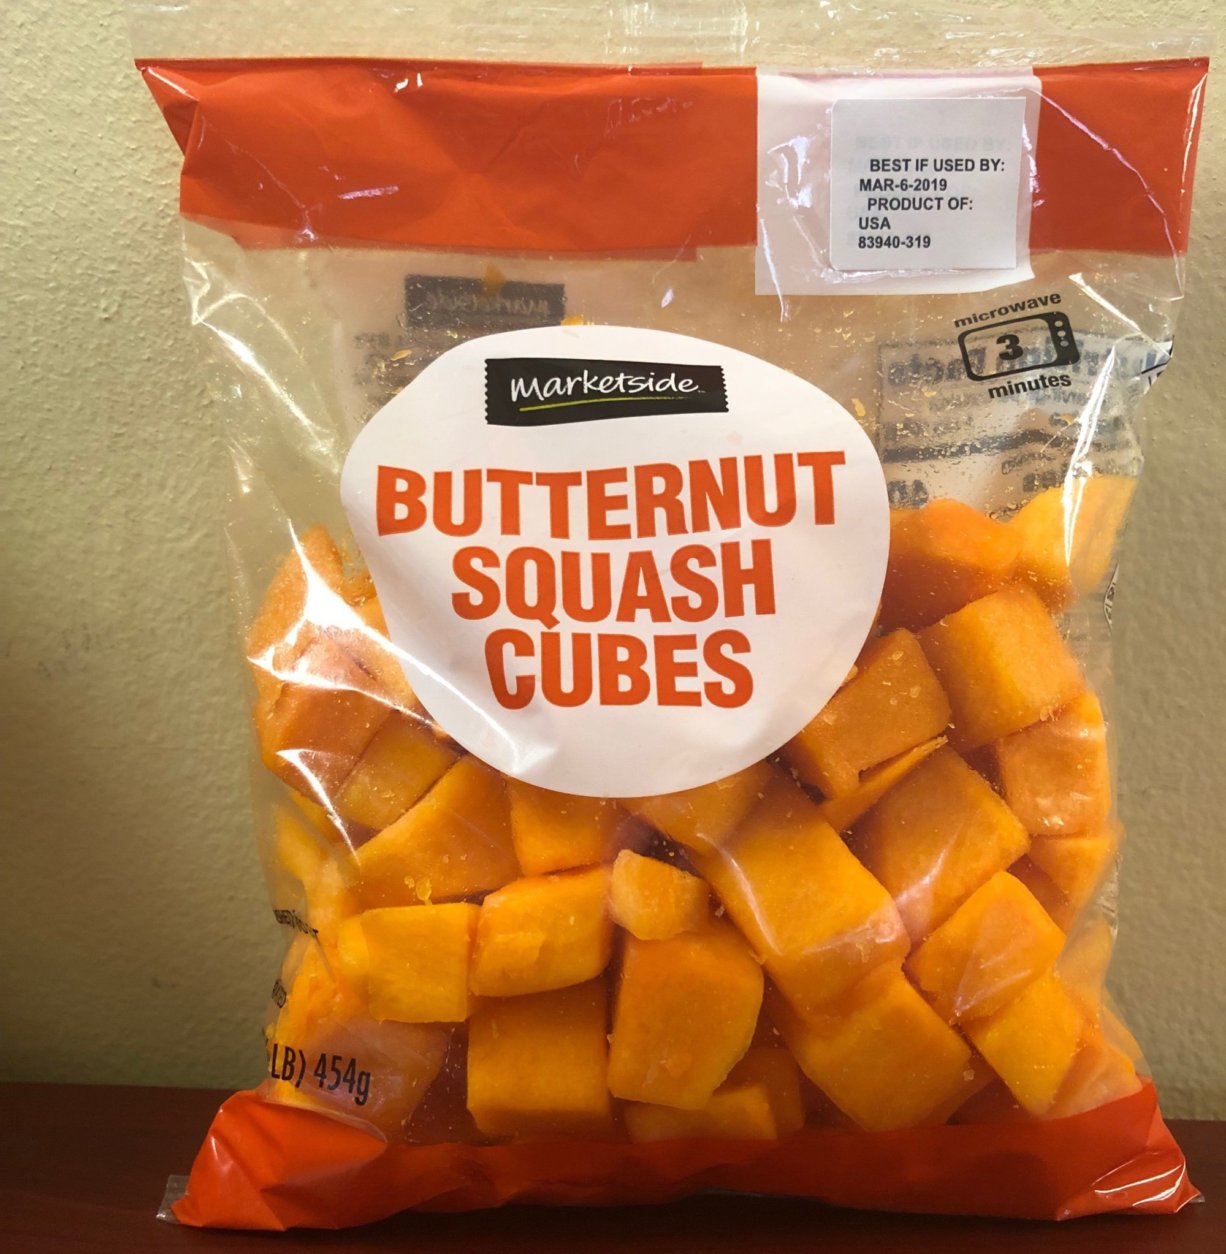 Marketside brand bagged butternut squash cubes, 16 ounces (Courtesy Southern Specialties)